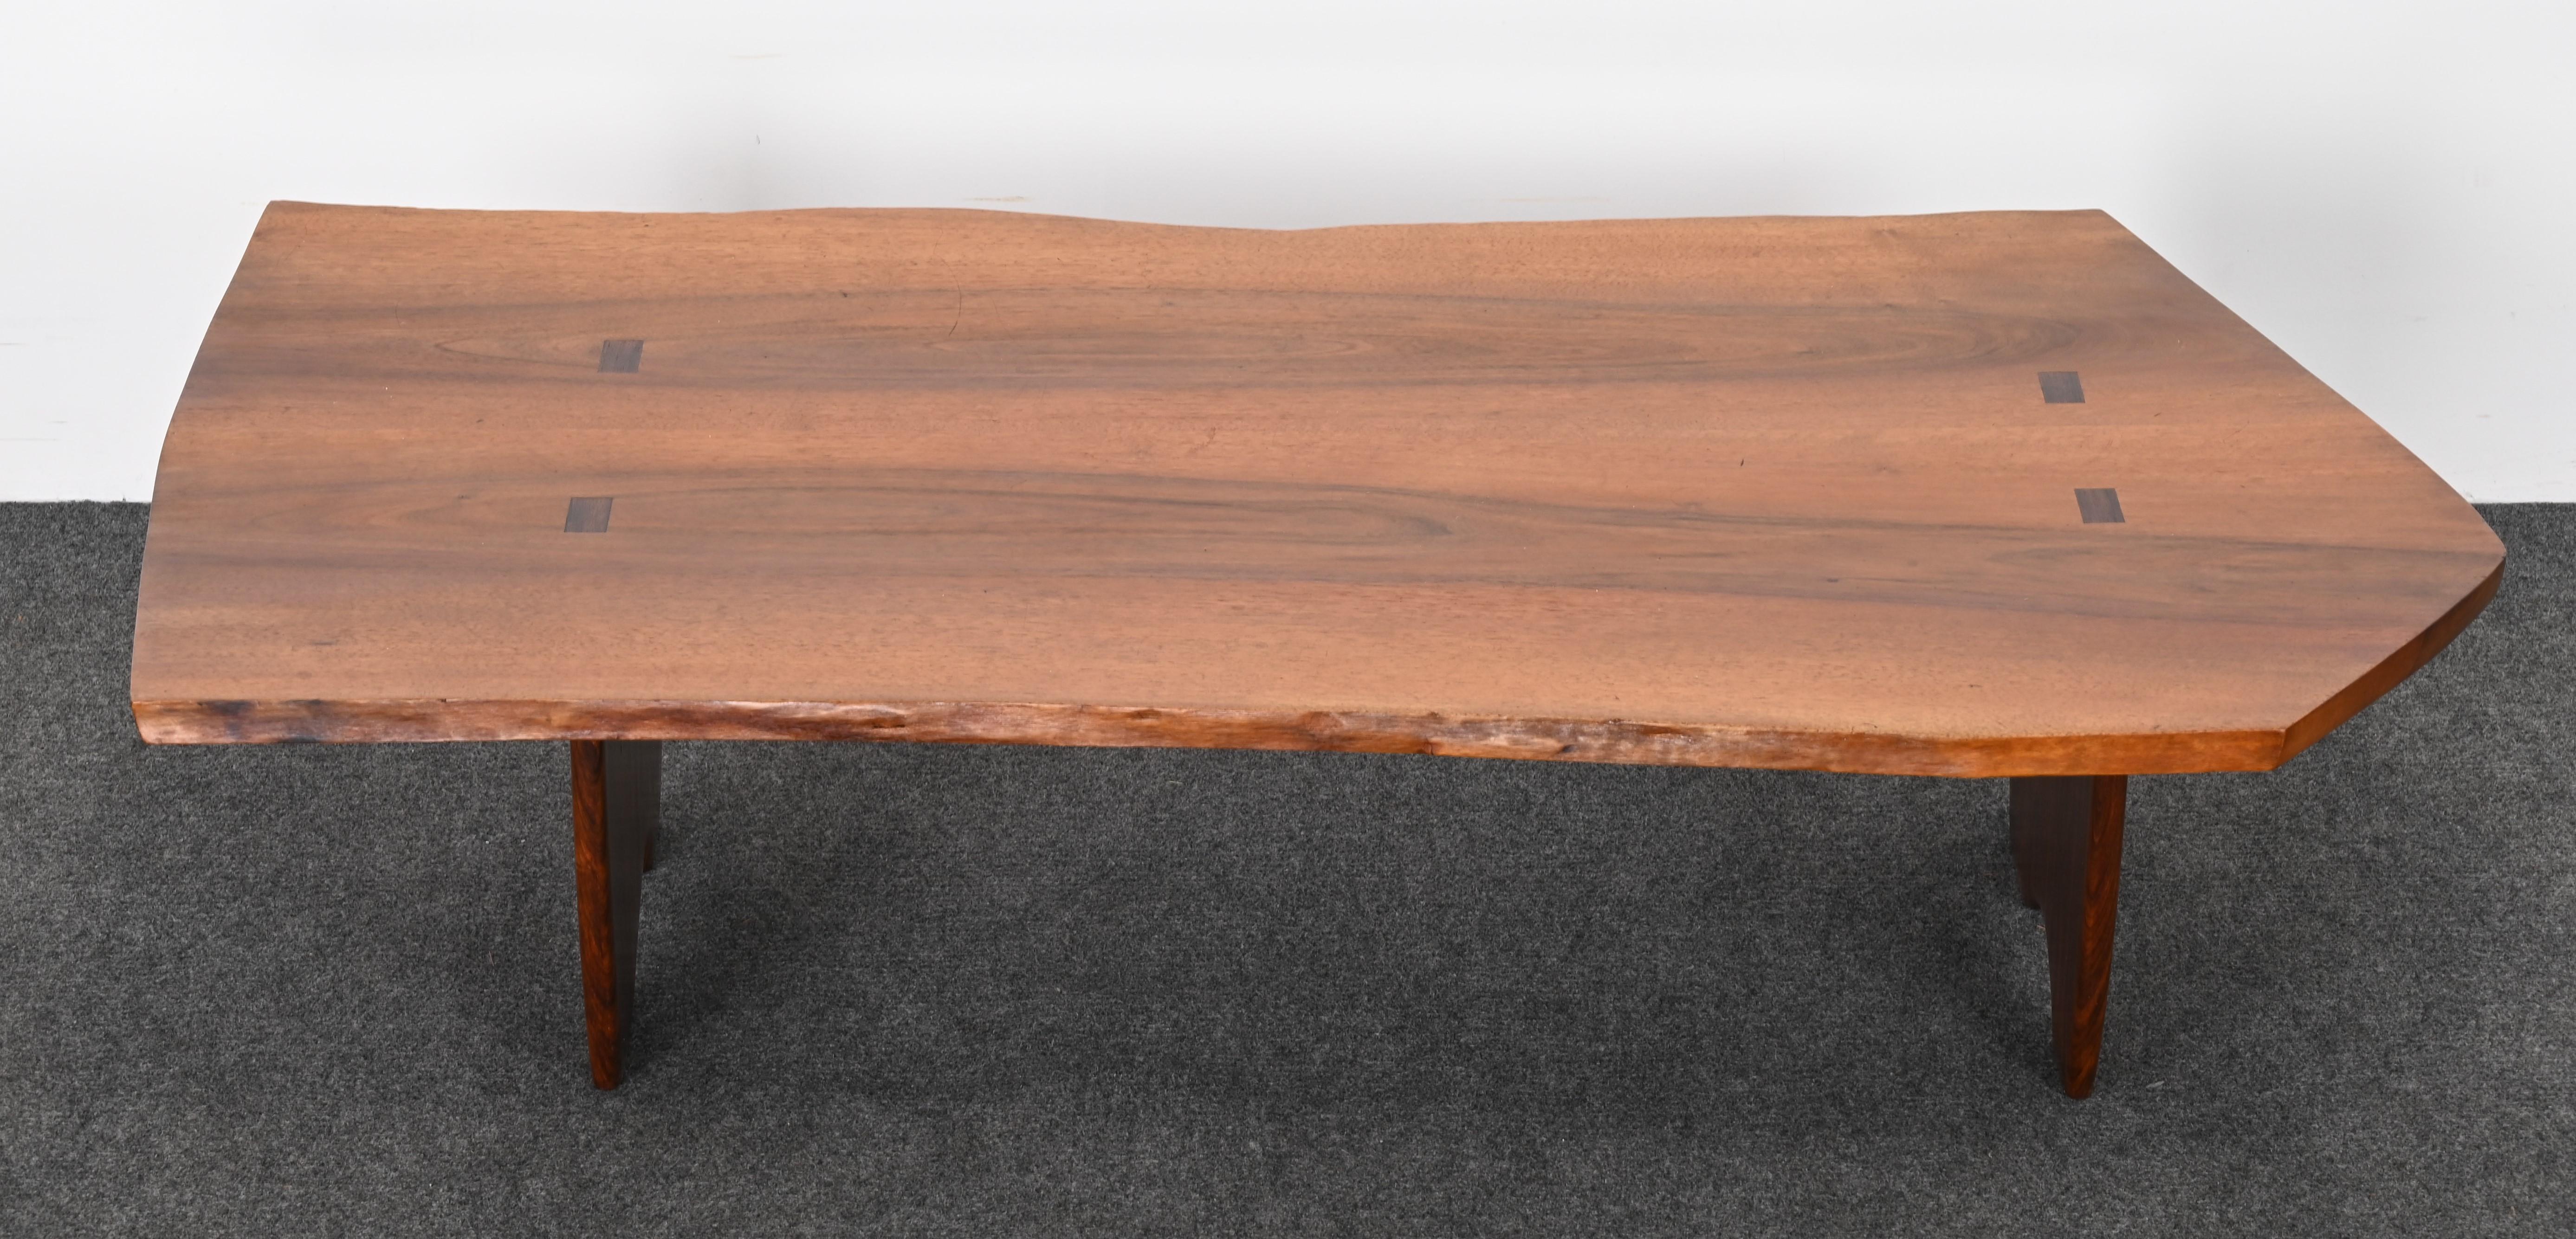 Live Edge Solid Walnut and Rosewood Coffee Table by Richard Rothbard, 1968 For Sale 2